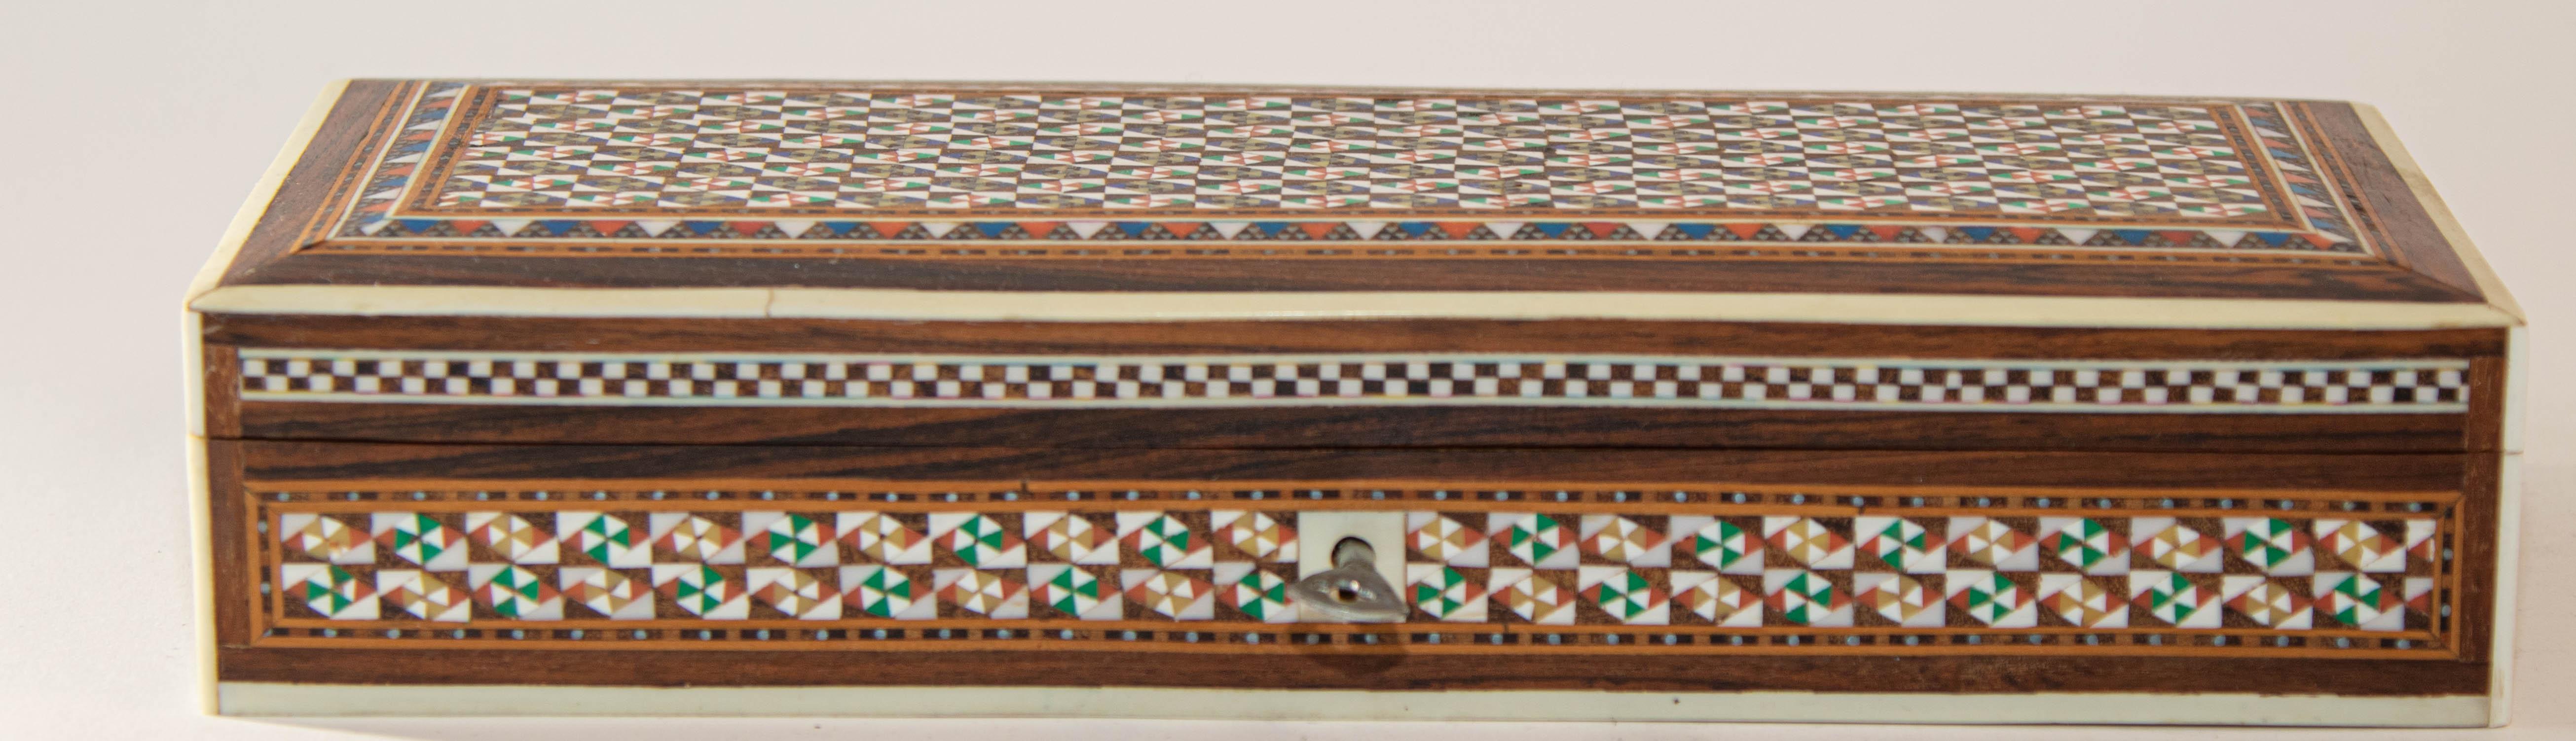 Lebanese 1950s Fine Handcrafted Syrian Mother-of-Pearl Inlay Box